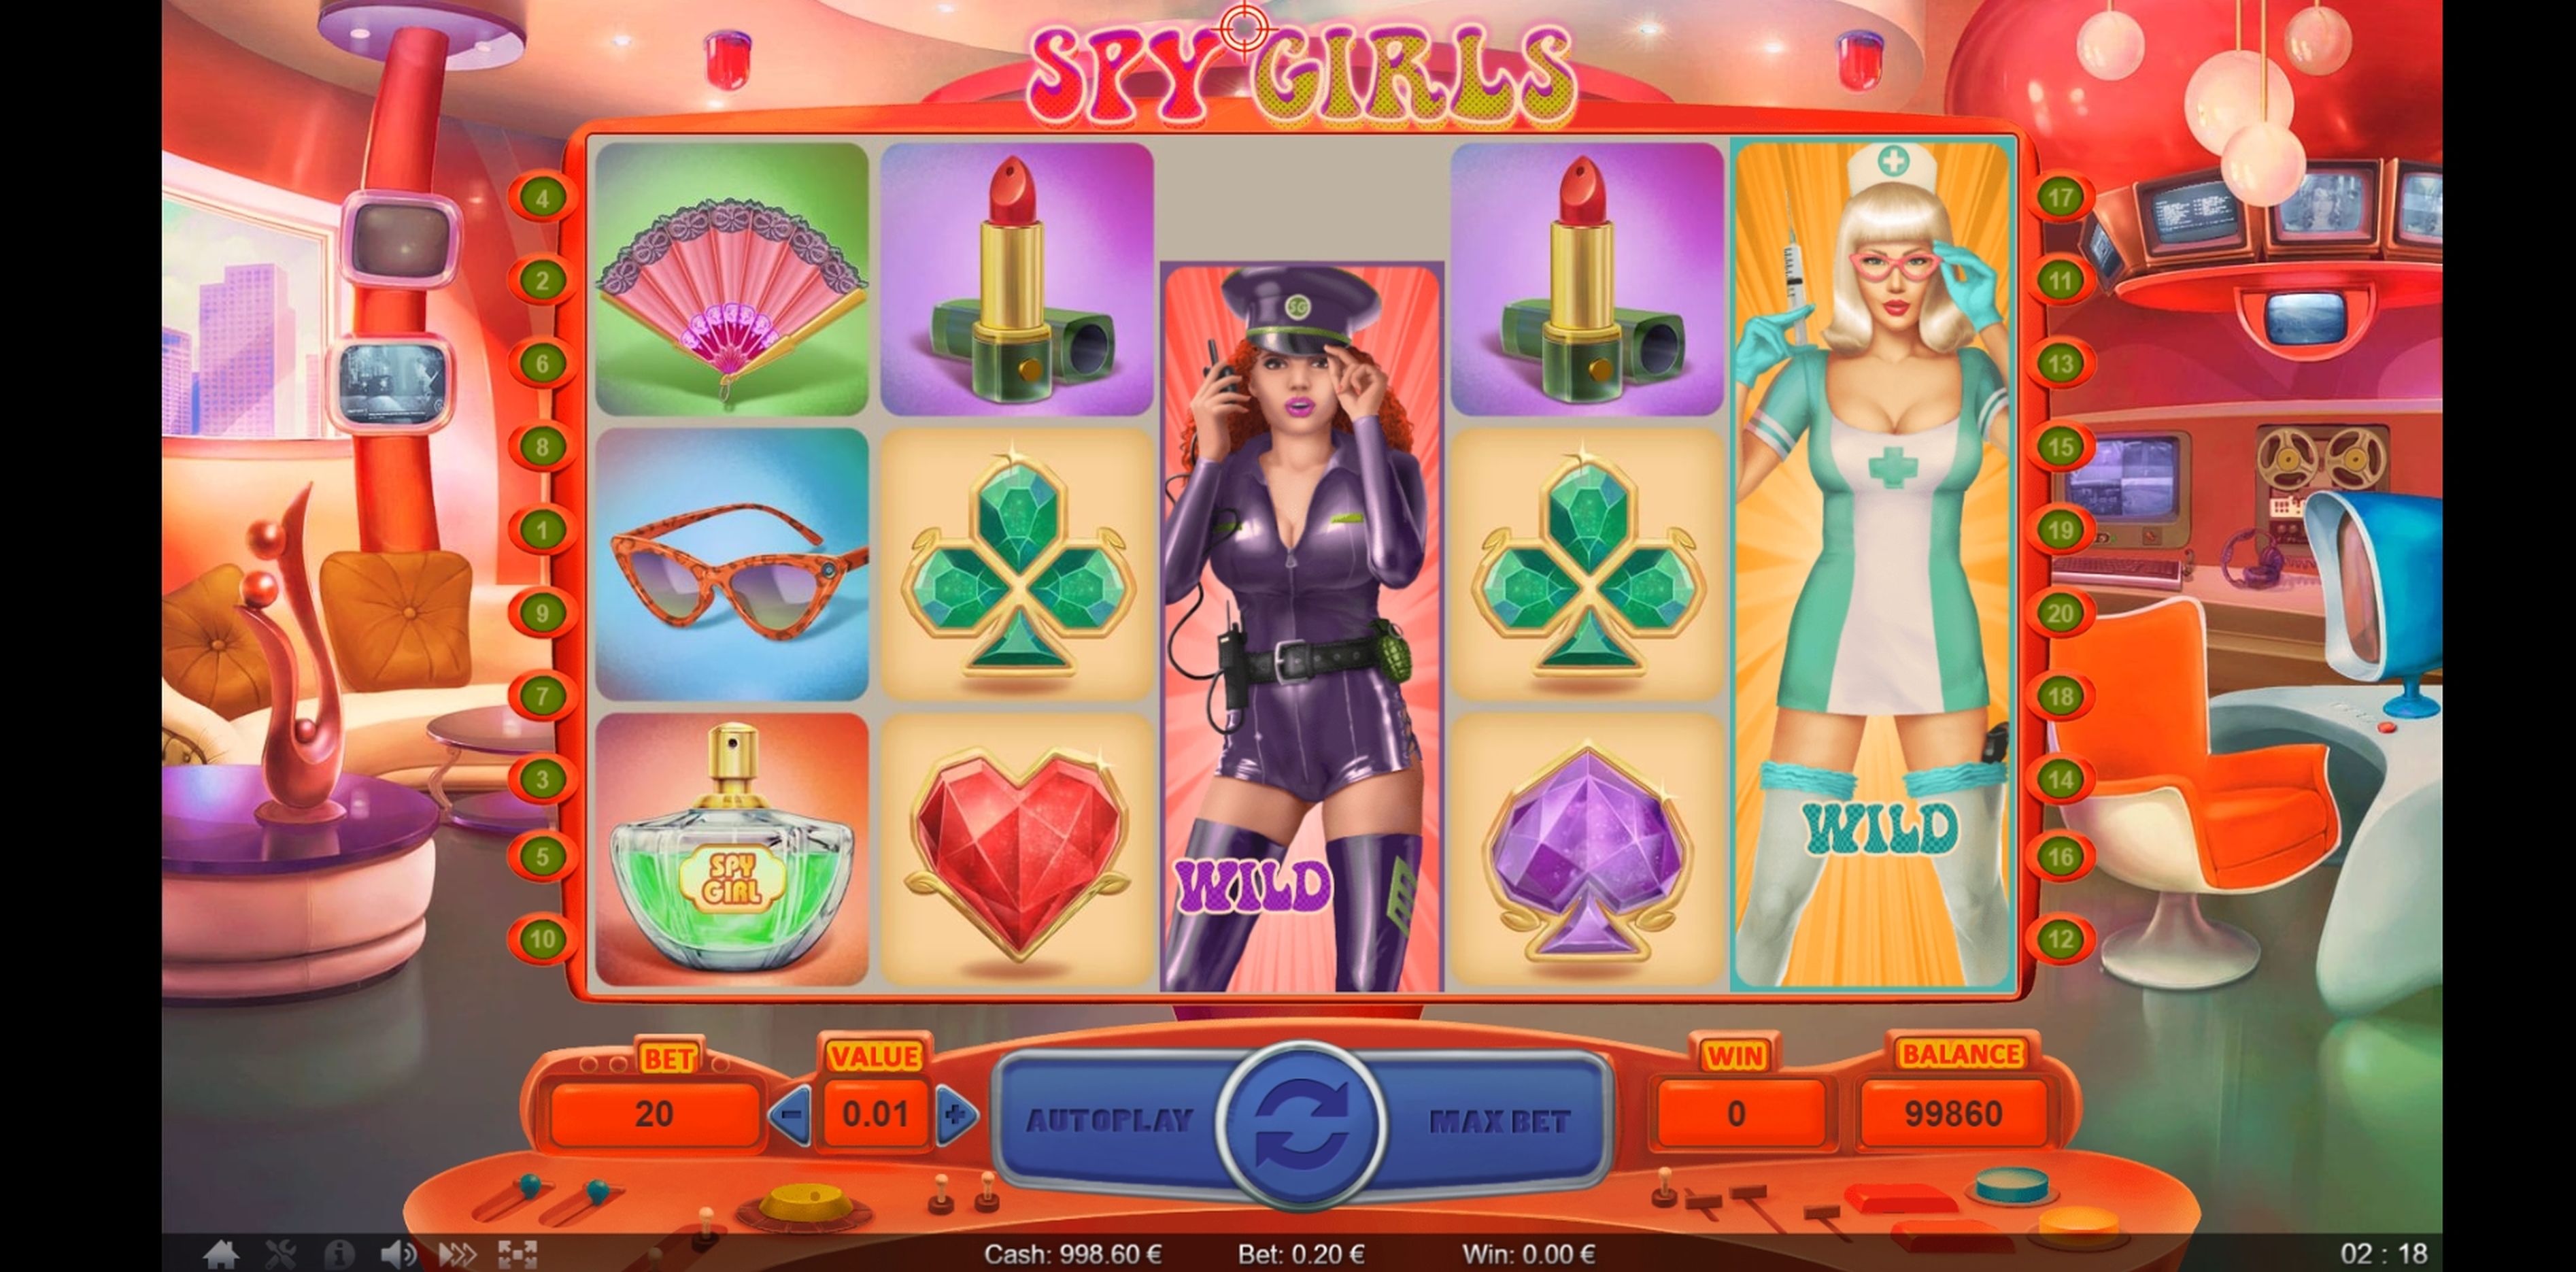 Win Money in Spy Girls Free Slot Game by Thunderspin